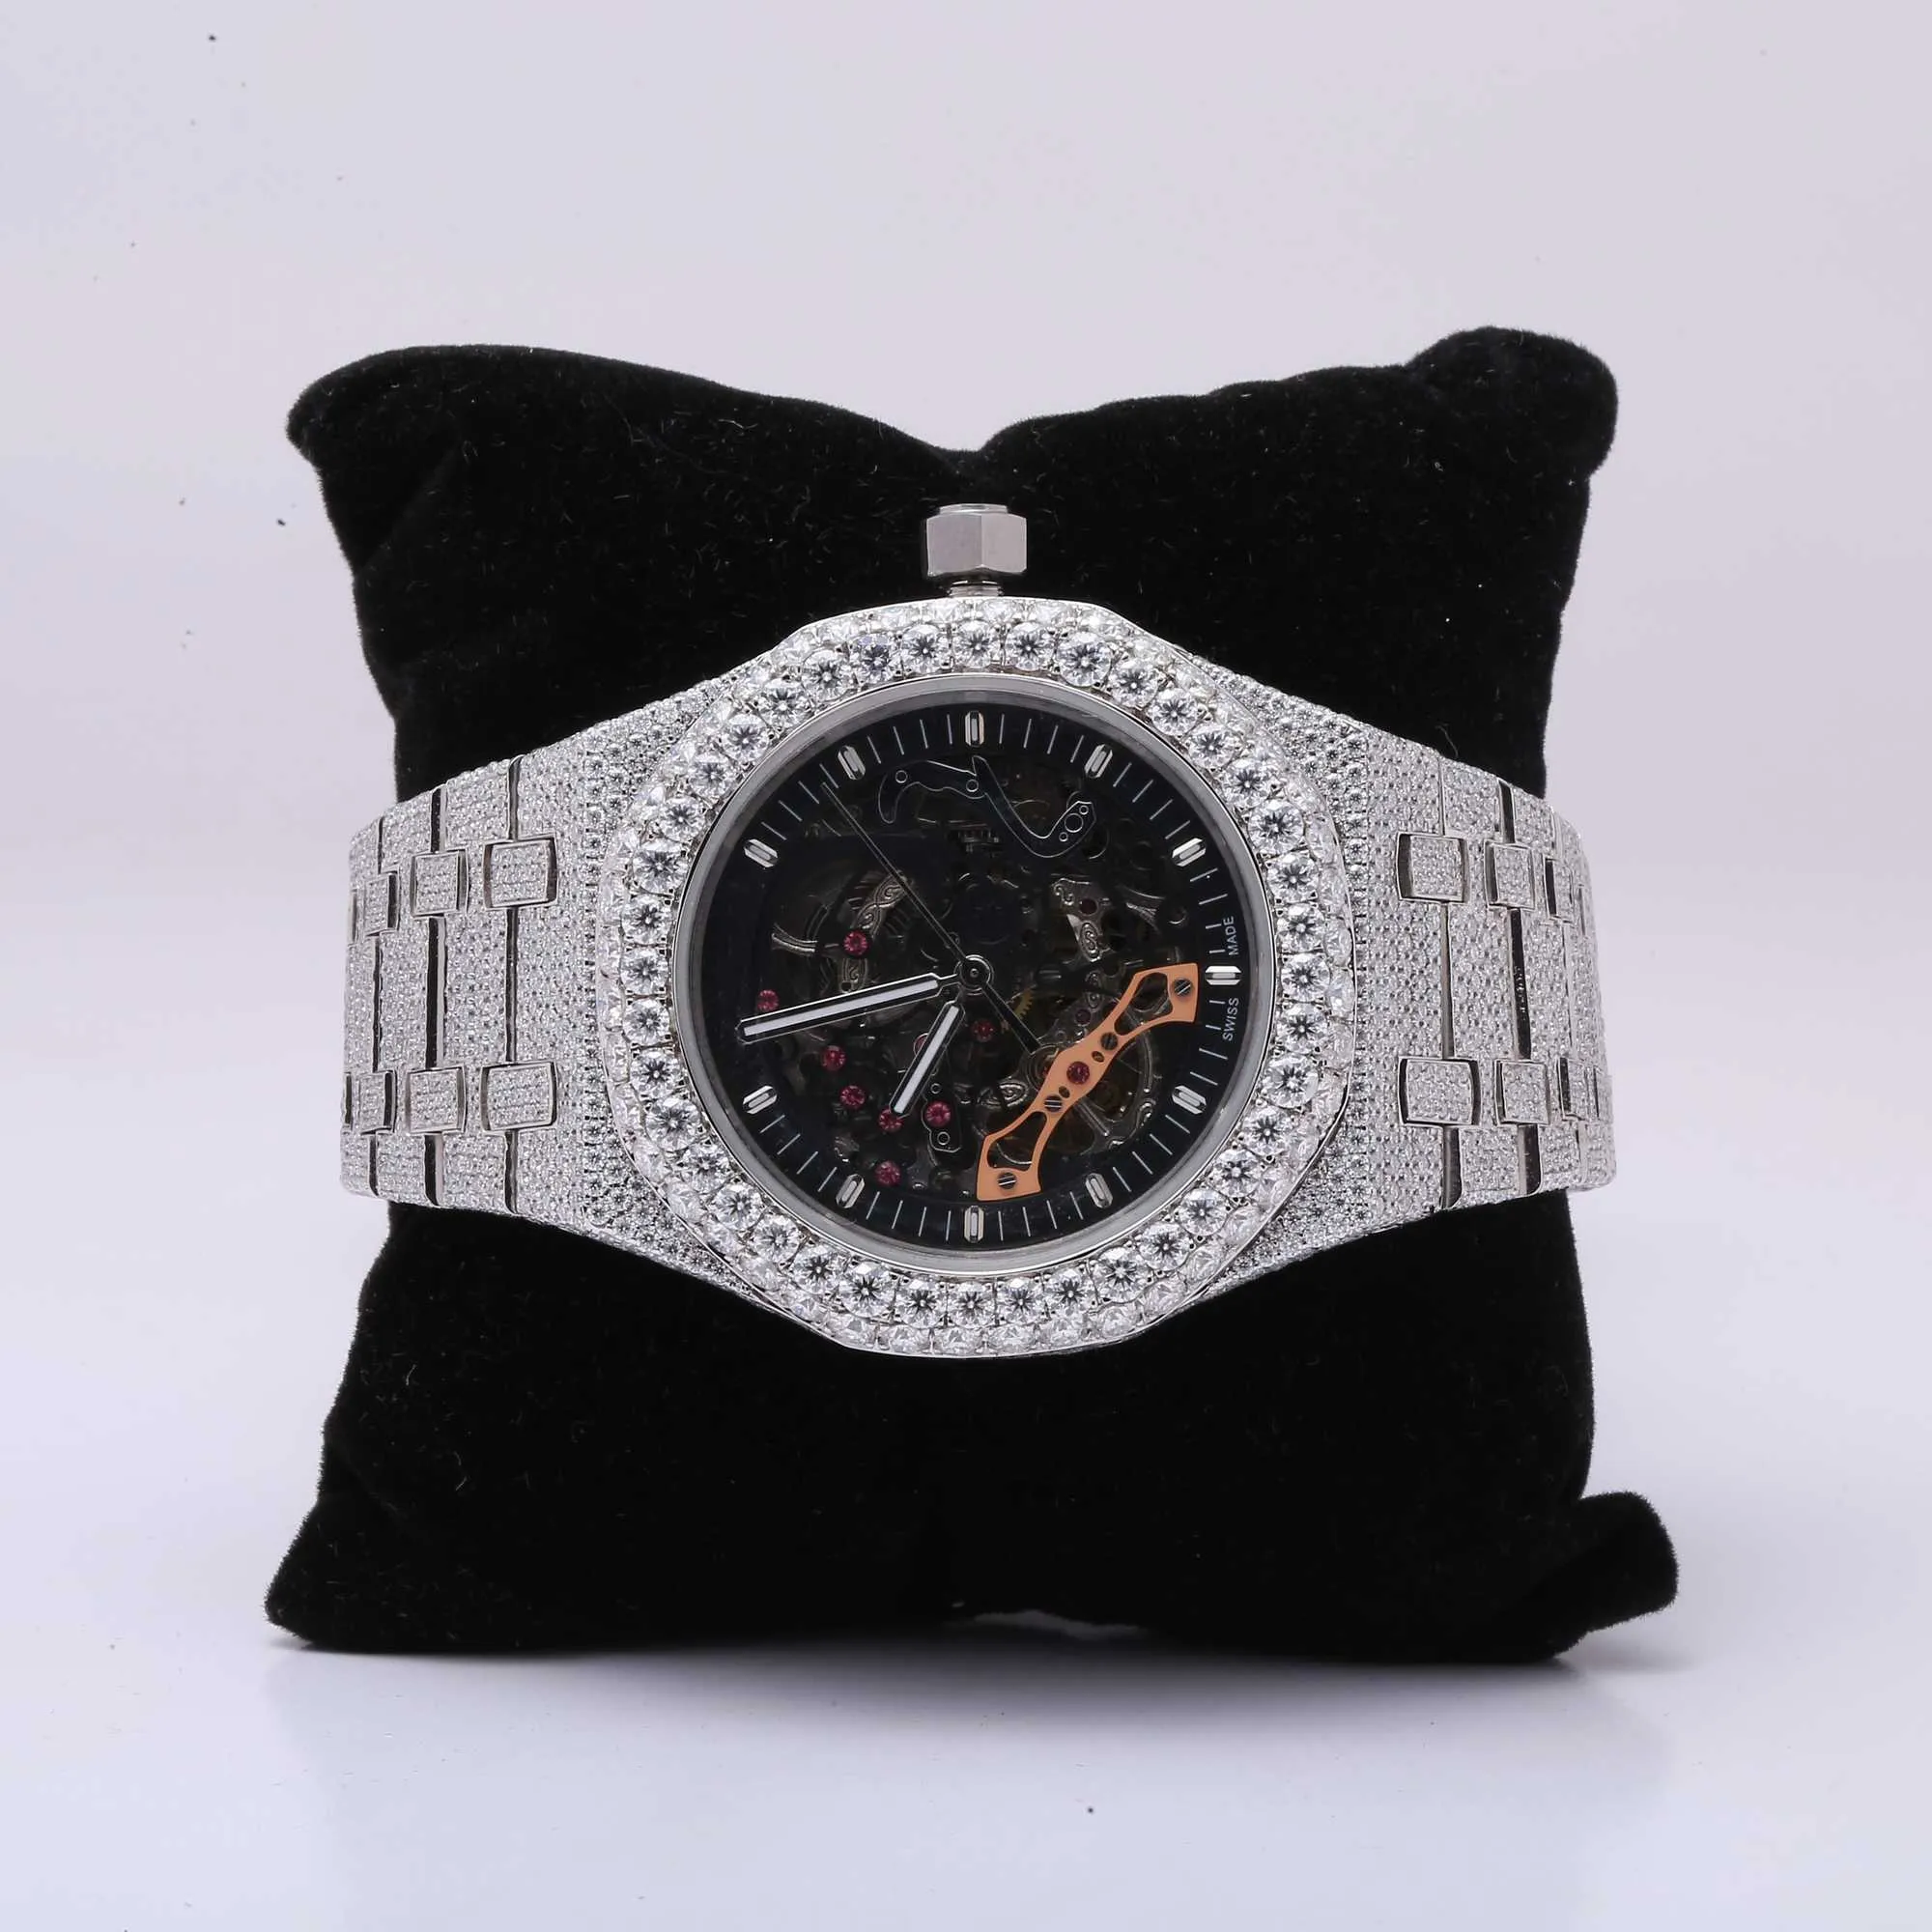 Other Watches Wristwatches iced out customize diamond luxury men' handmade fine jewelry manufacturer VVS1 diamond watchUIJY6T3S